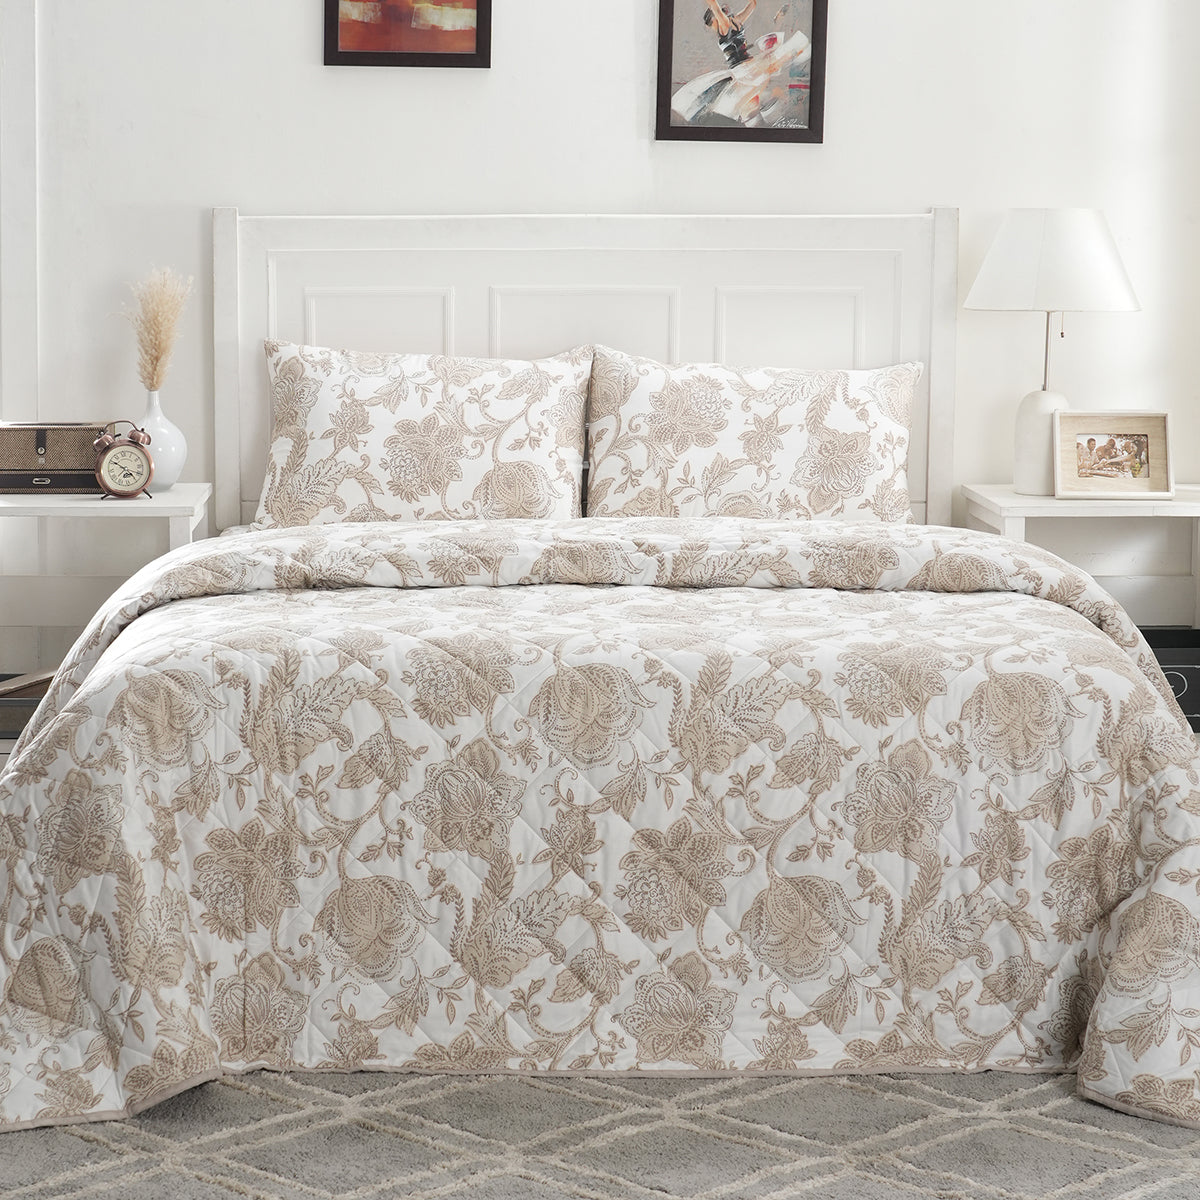 Royal Botanic 115 GSM Mabel Quilt/Quilted Bed Cover